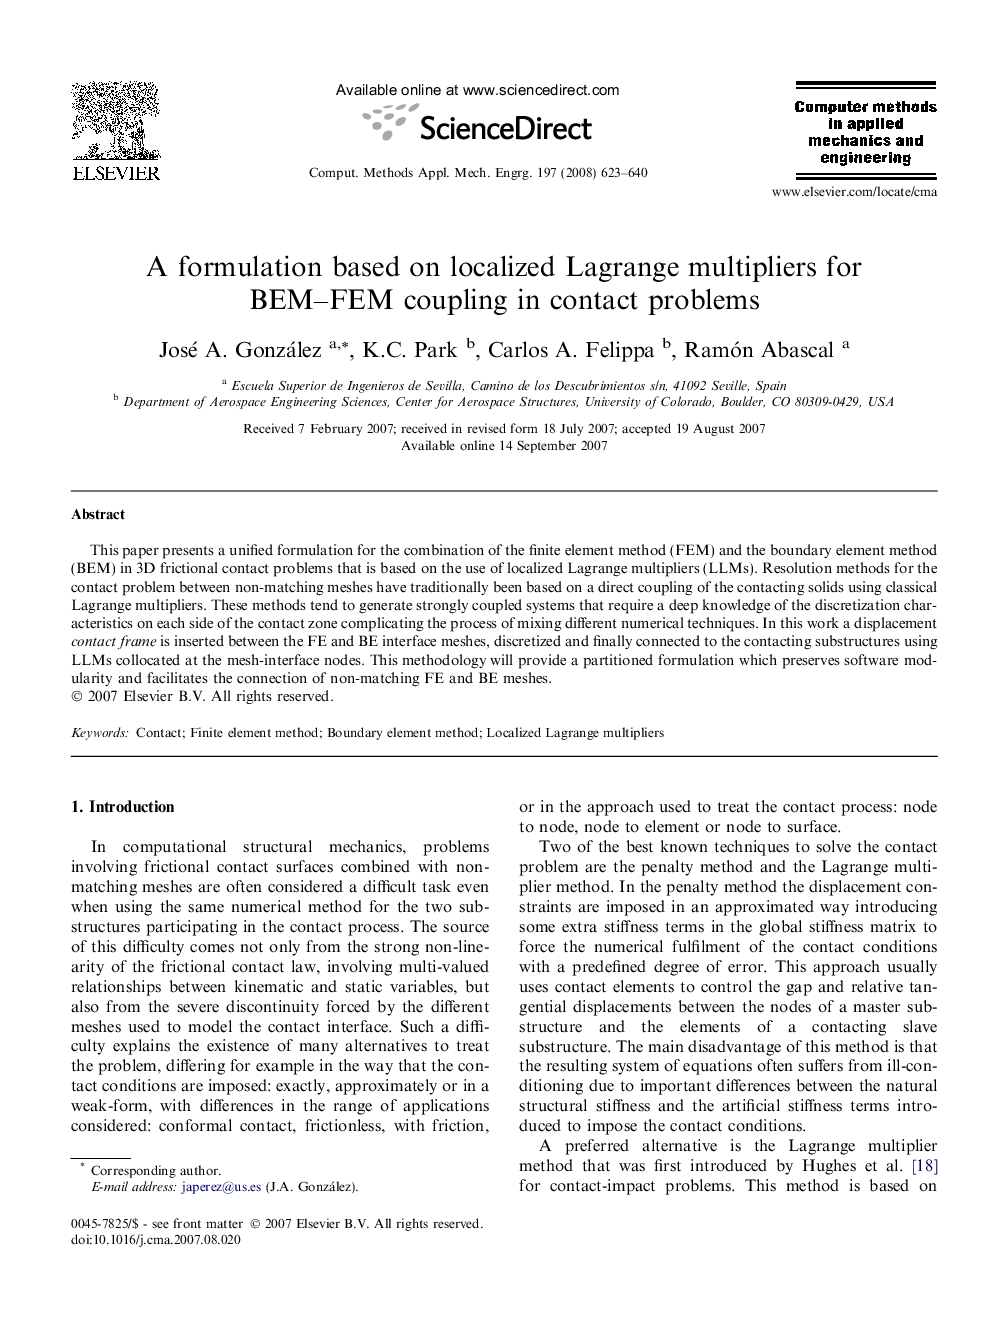 A formulation based on localized Lagrange multipliers for BEM–FEM coupling in contact problems